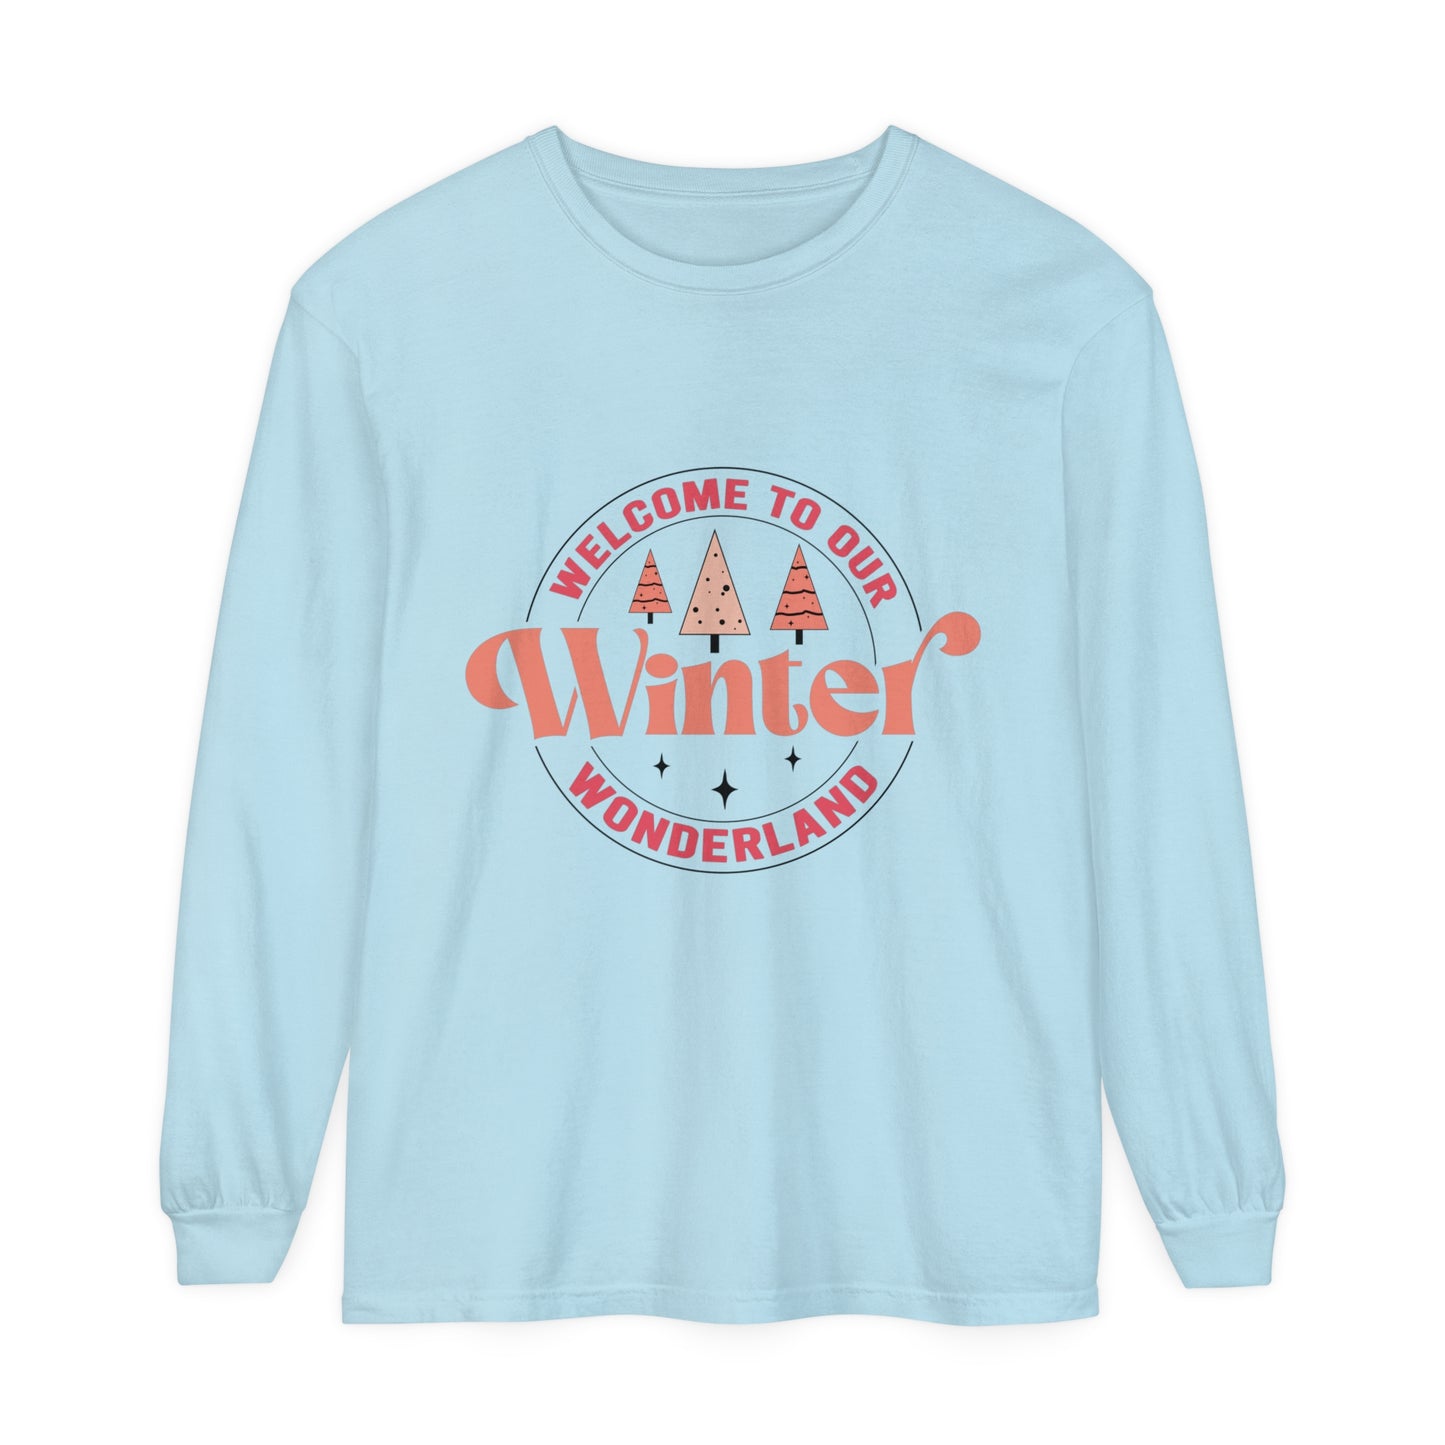 Welcome to our winter wonderland Women's Christmas Holiday Loose Long Sleeve T-Shirt